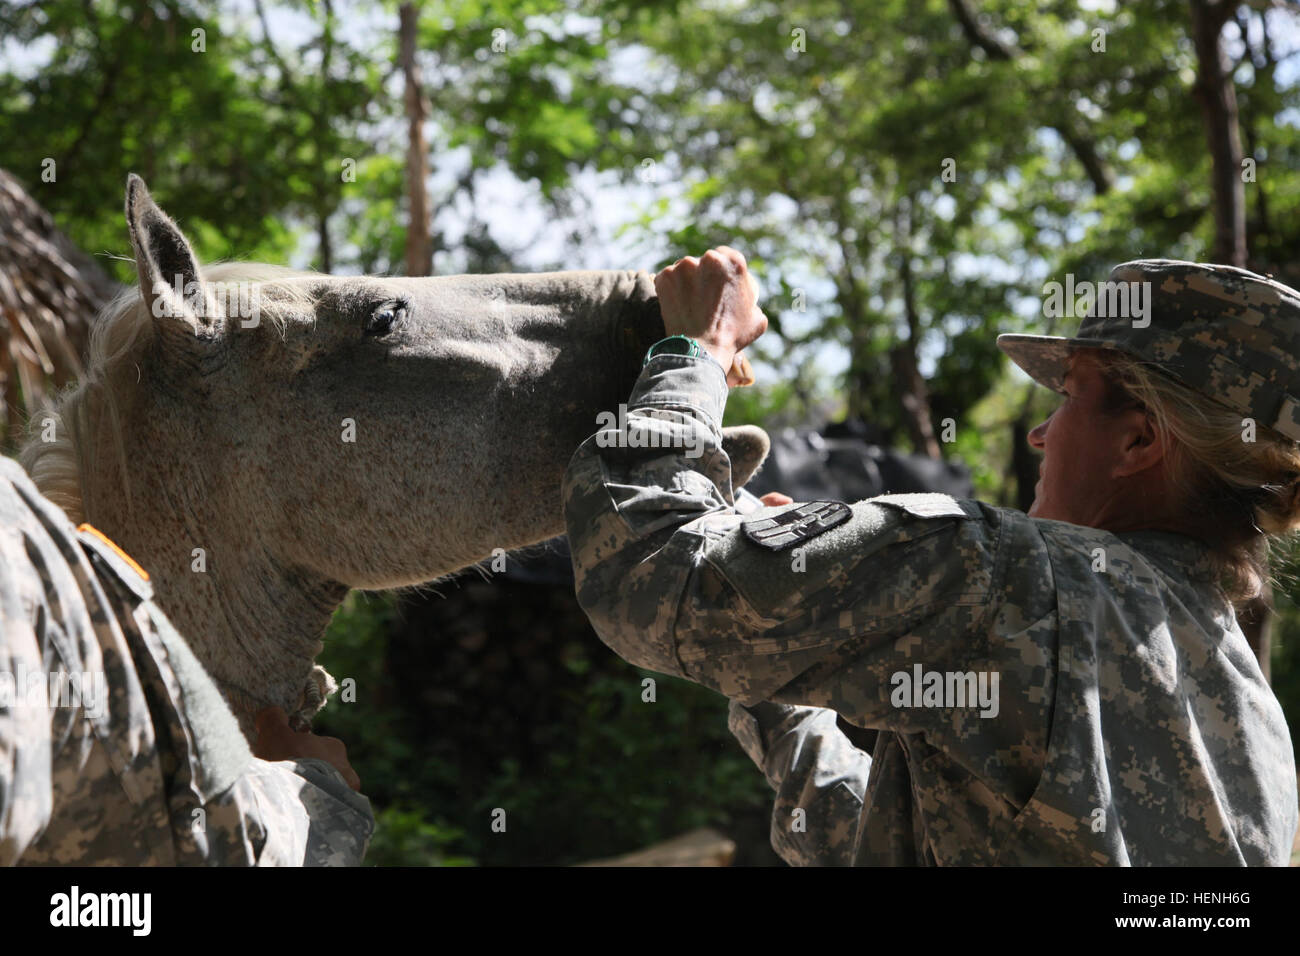 U.S. Army Maj. Victoria Smith, of the 149th Medical Detachment Veterinary Services, vaccinates a horse for a Veterinary Readiness Training Exercise during Beyond the Horizon, San Jose, Guatemala, May 25, 2015. Beyond the Horizon is an annual exercise that embraces the partnership between the United States and Guatemala, to provide focused humanitarian assistance through various medical, dental, and civic action programs. (U.S. Army photo by Pfc. Christopher Martin/Released) Beyond the Horizon 2014, Guatemala 140525-A-GA303-003 Stock Photo